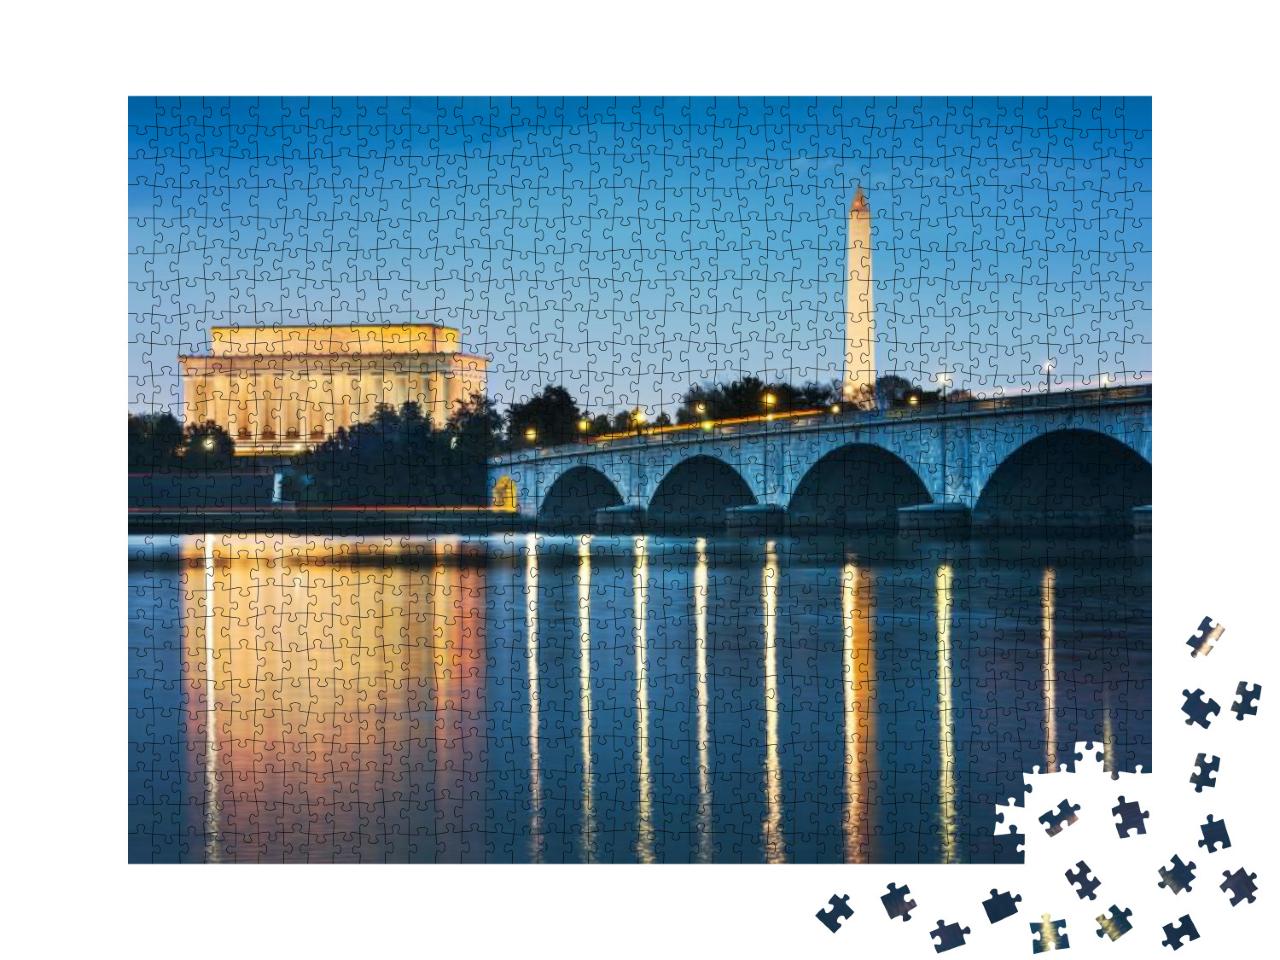 Washington Dc, USA Skyline on the Potomac River At Night... Jigsaw Puzzle with 1000 pieces